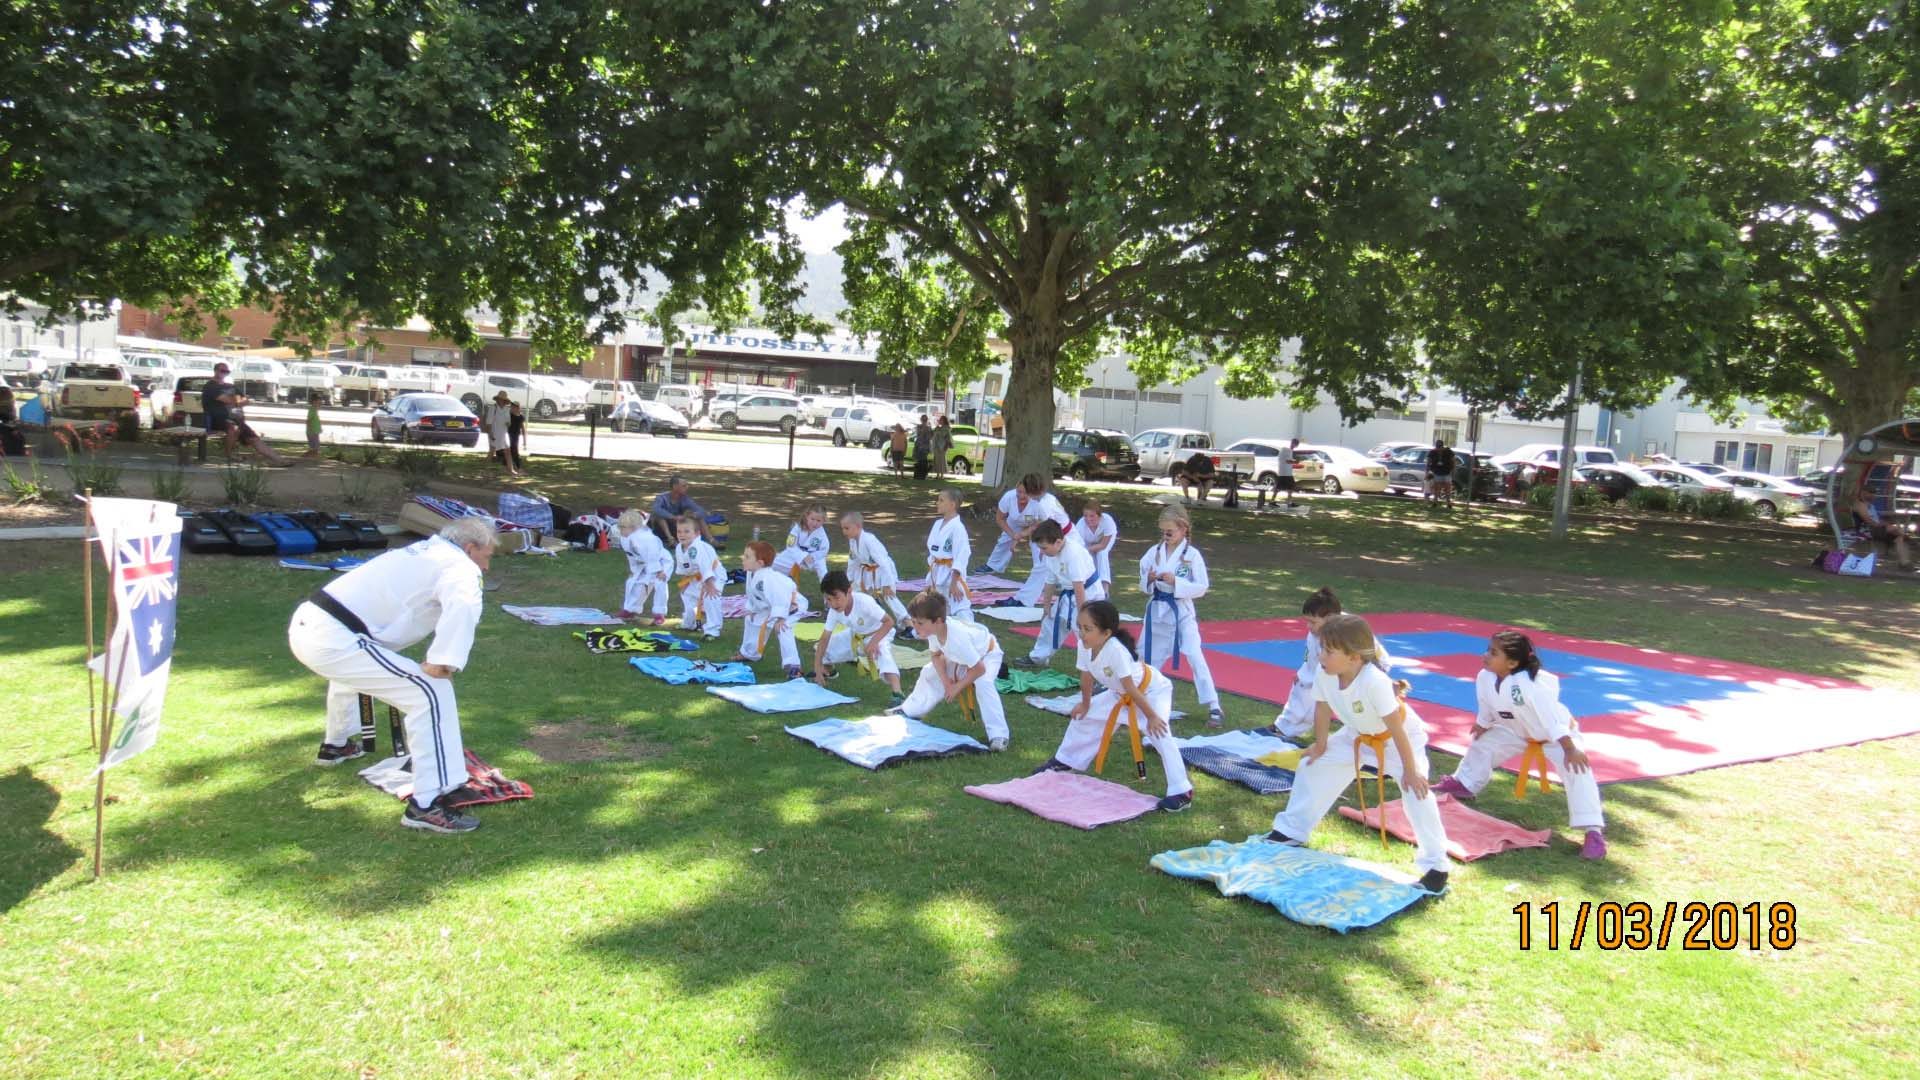 Young students preparing to practice the martial art of taekwondo in a park in Tamworth.